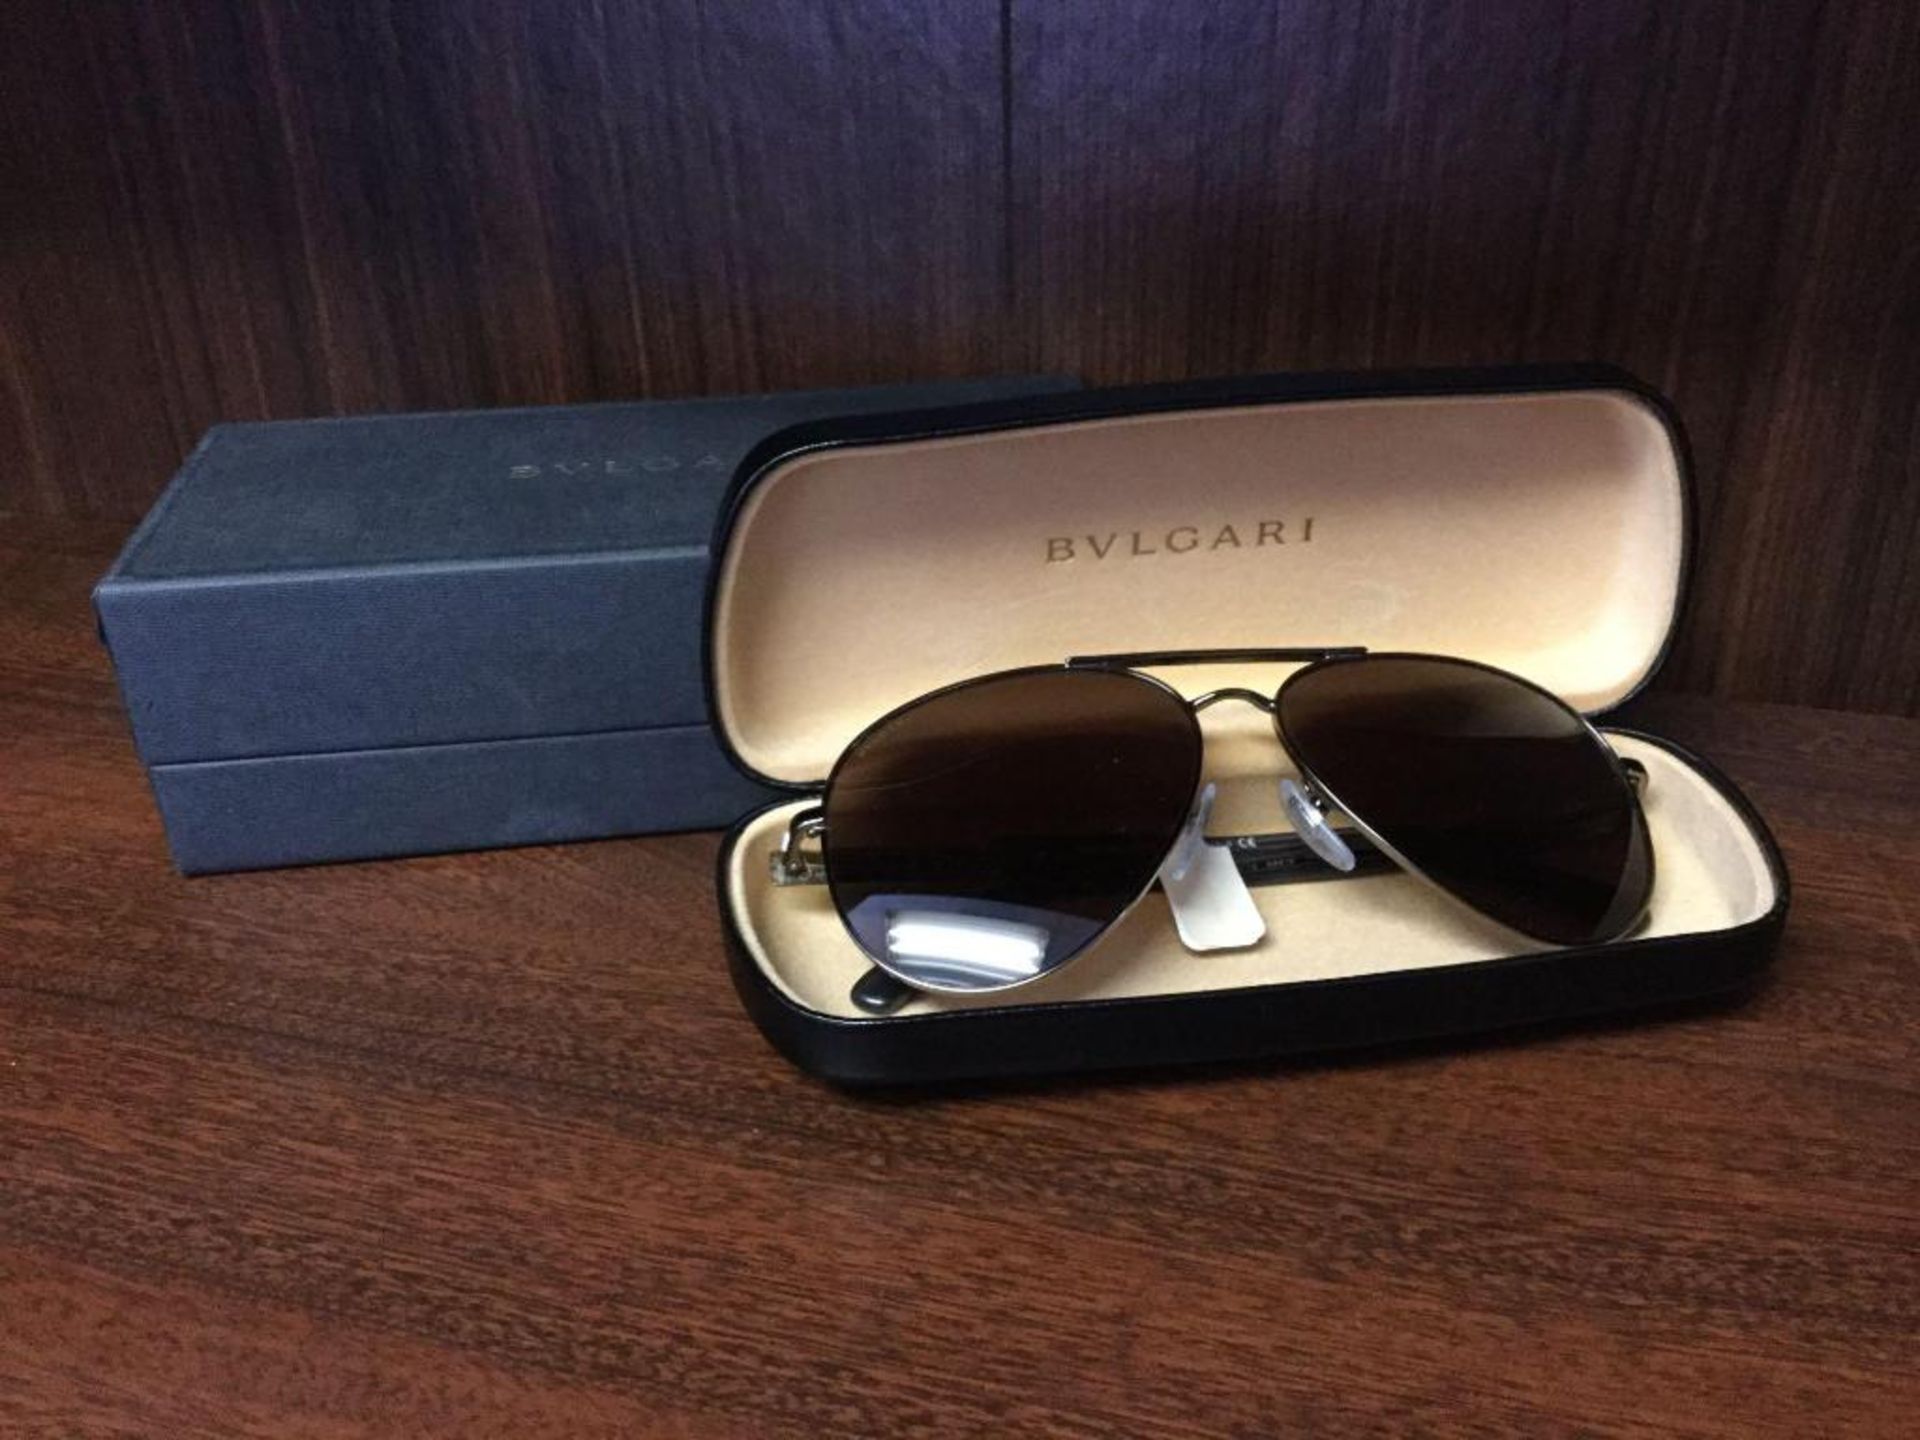 BVLGARI SUNGLASSES WITH CASE AND BOX VALUE $410 - Image 2 of 2